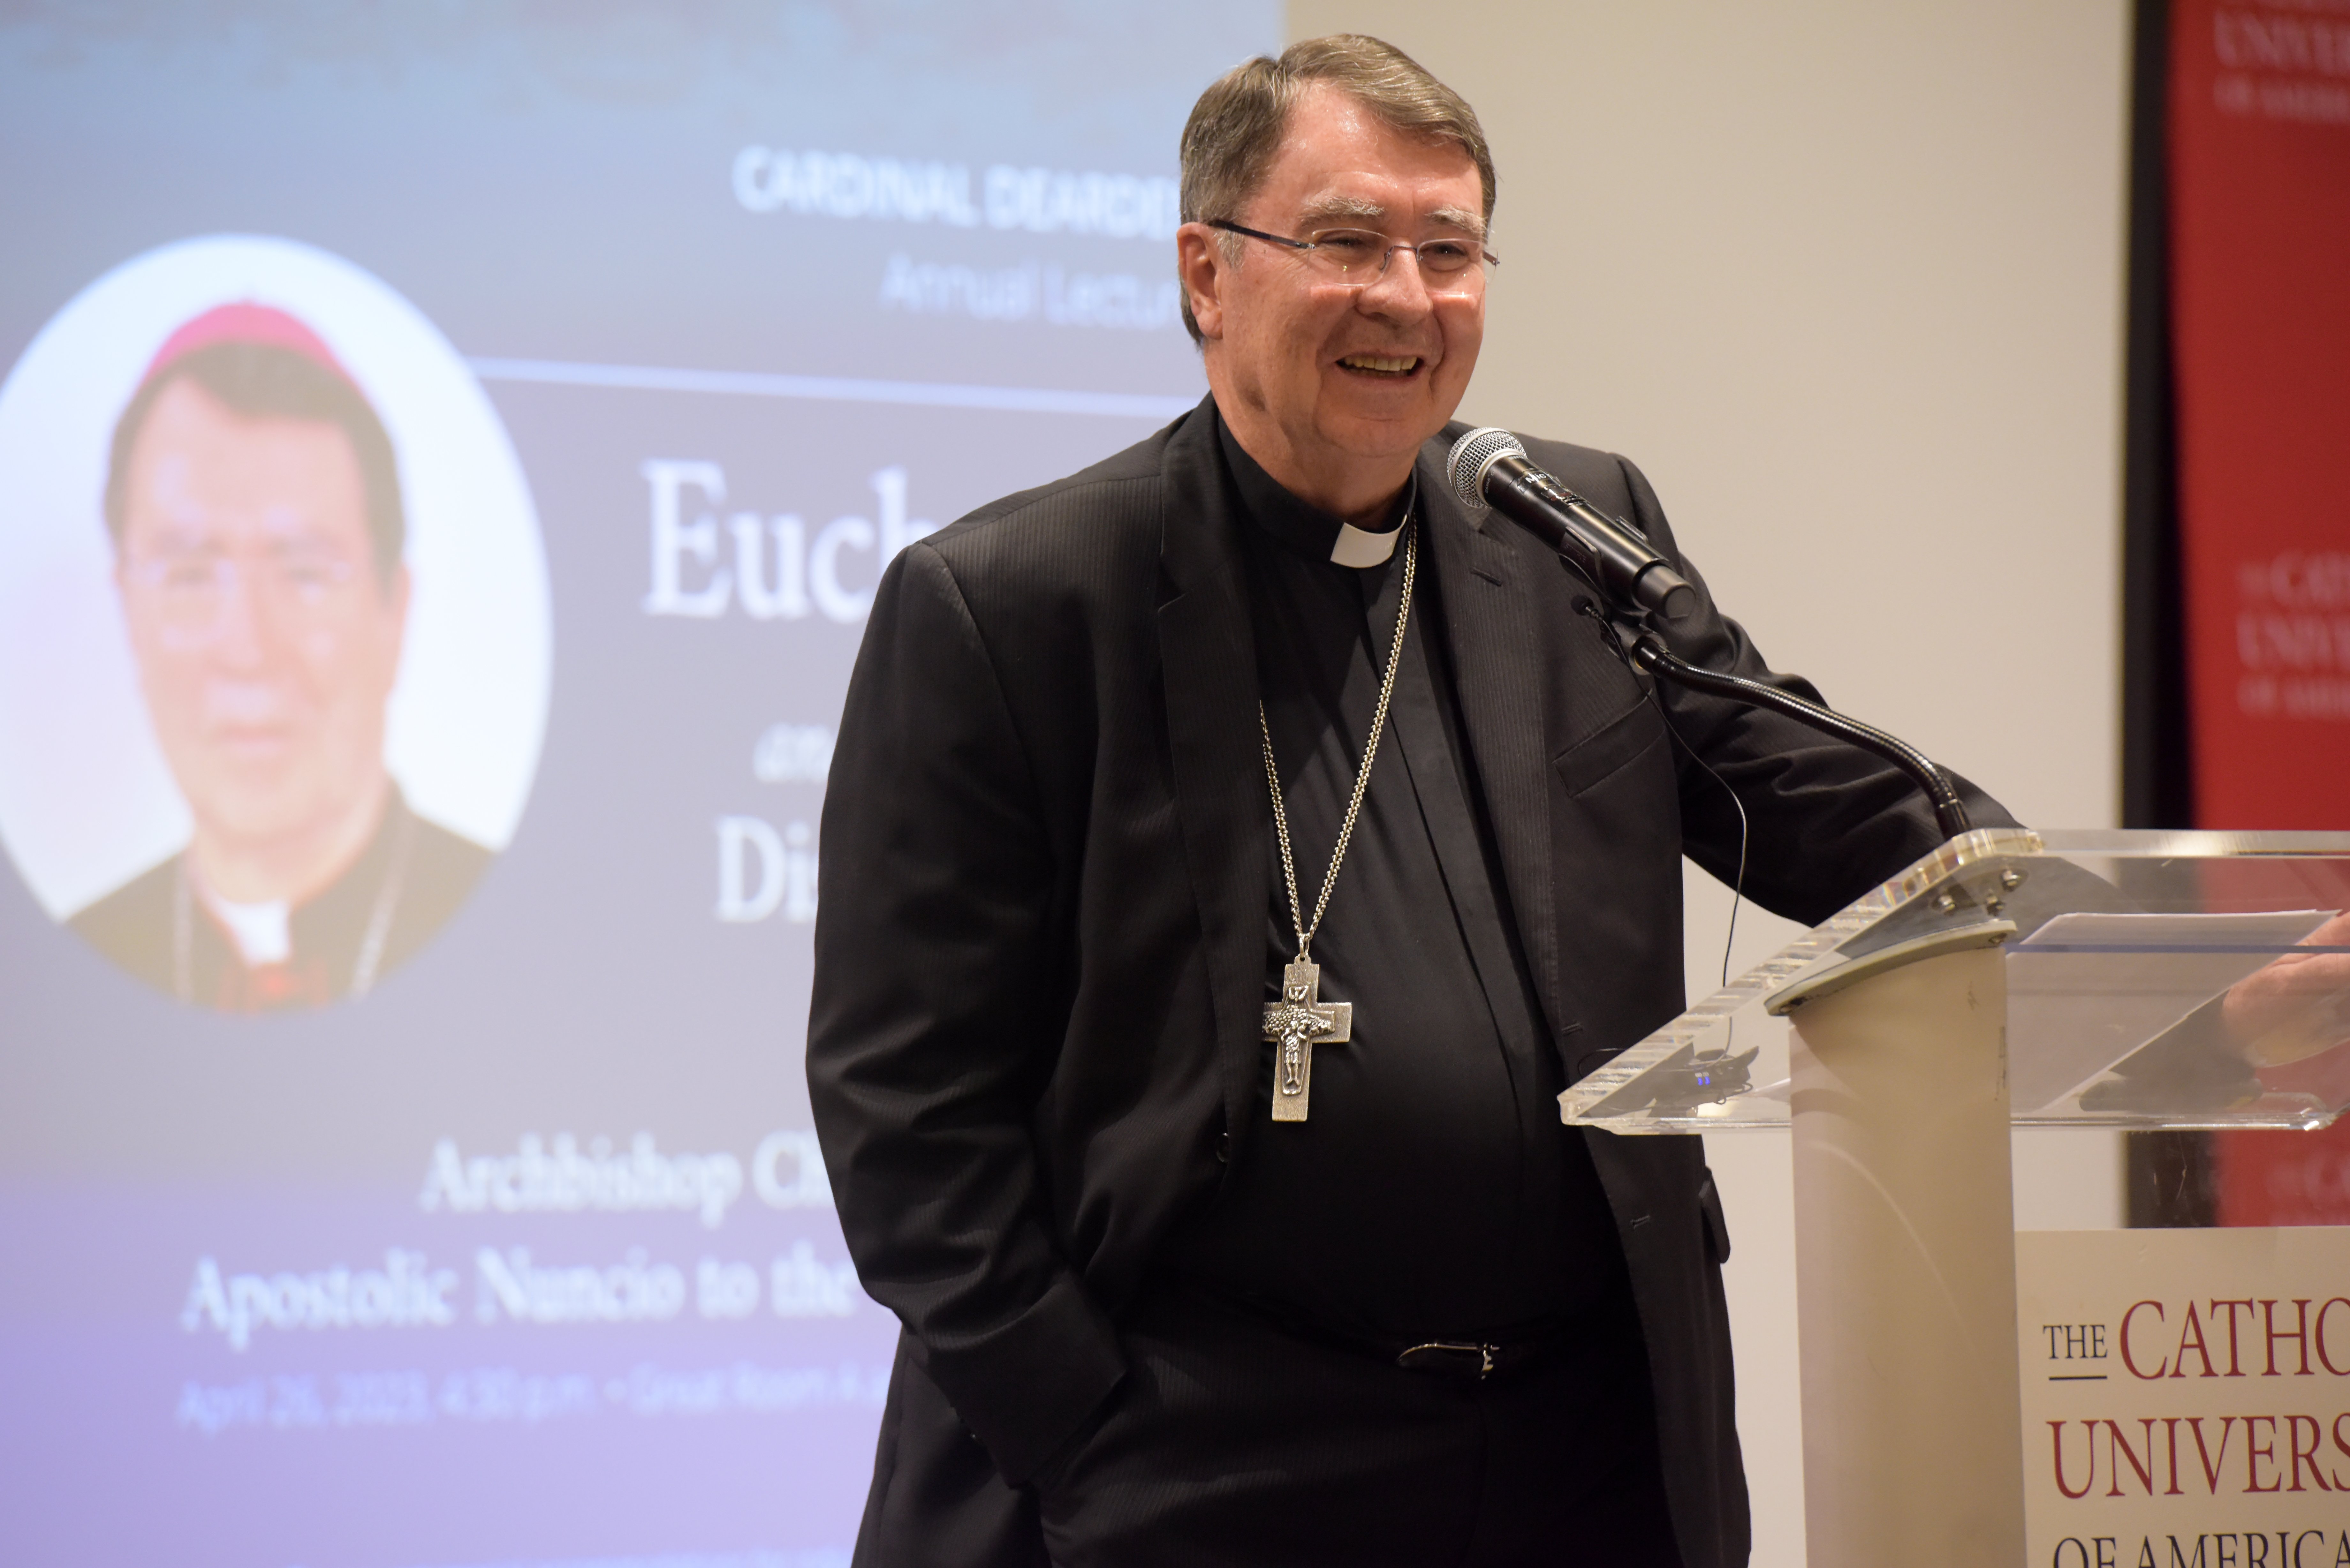 Archbishop Christophe Pierre, apostolic nuncio to the United States, gives the annual Cardinal Dearden Lecture at The Catholic University of America in Washington April 26, 2023. The lecture honors the late Archbishop John Dearden of Detroit, known for implementing the Second Vatican Council's teachings in the United States. (OSV News photo/courtesy Patrick Ryan, The Catholic University of America)